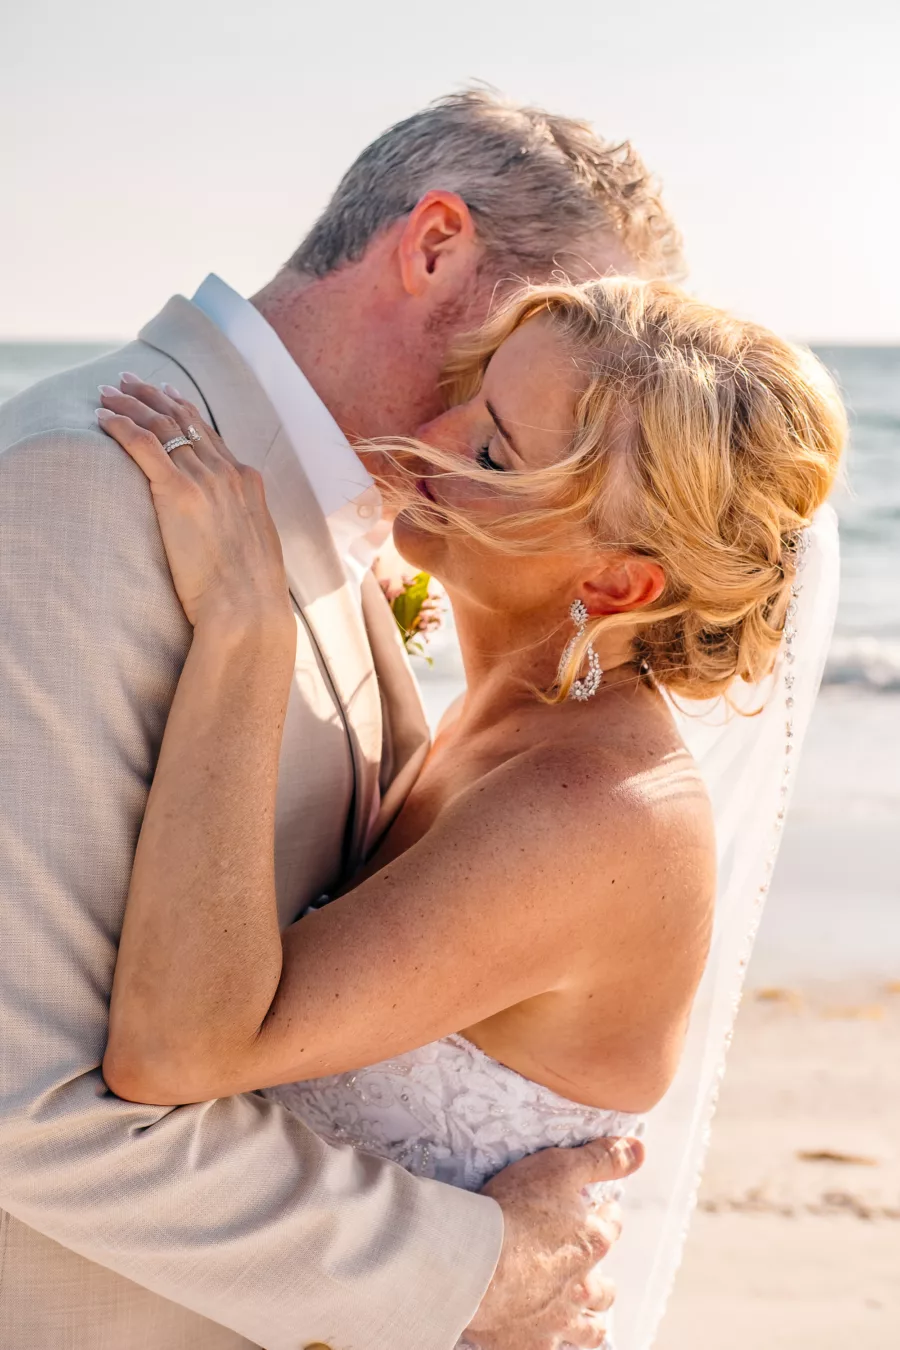 Bride and Groom Just Married Sunset Wedding Portrait | Tampa Bay Event Planner Gulf Beach Weddings